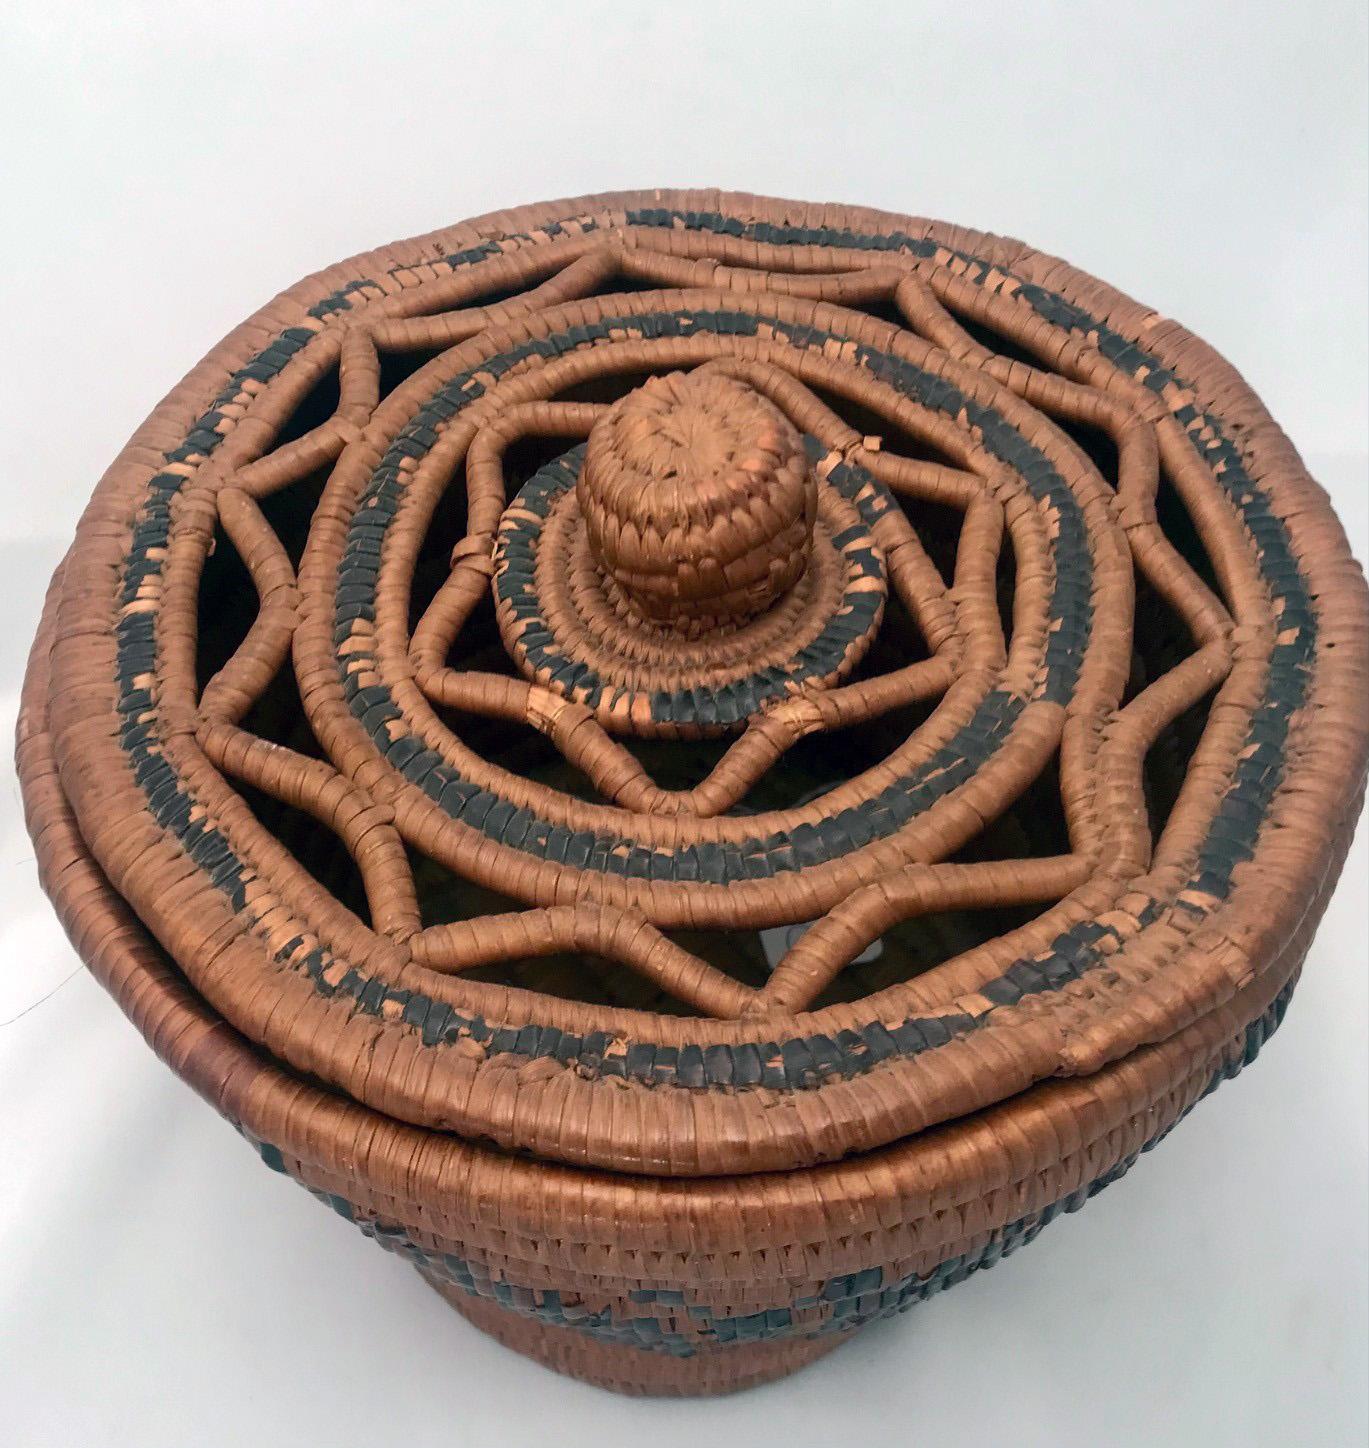 The Salish basket, circa 1900, is finely woven with a stylized imbricate design, the cover has a cutout star design with central knob, there are minor losses to the decoration, particularly to the cover.